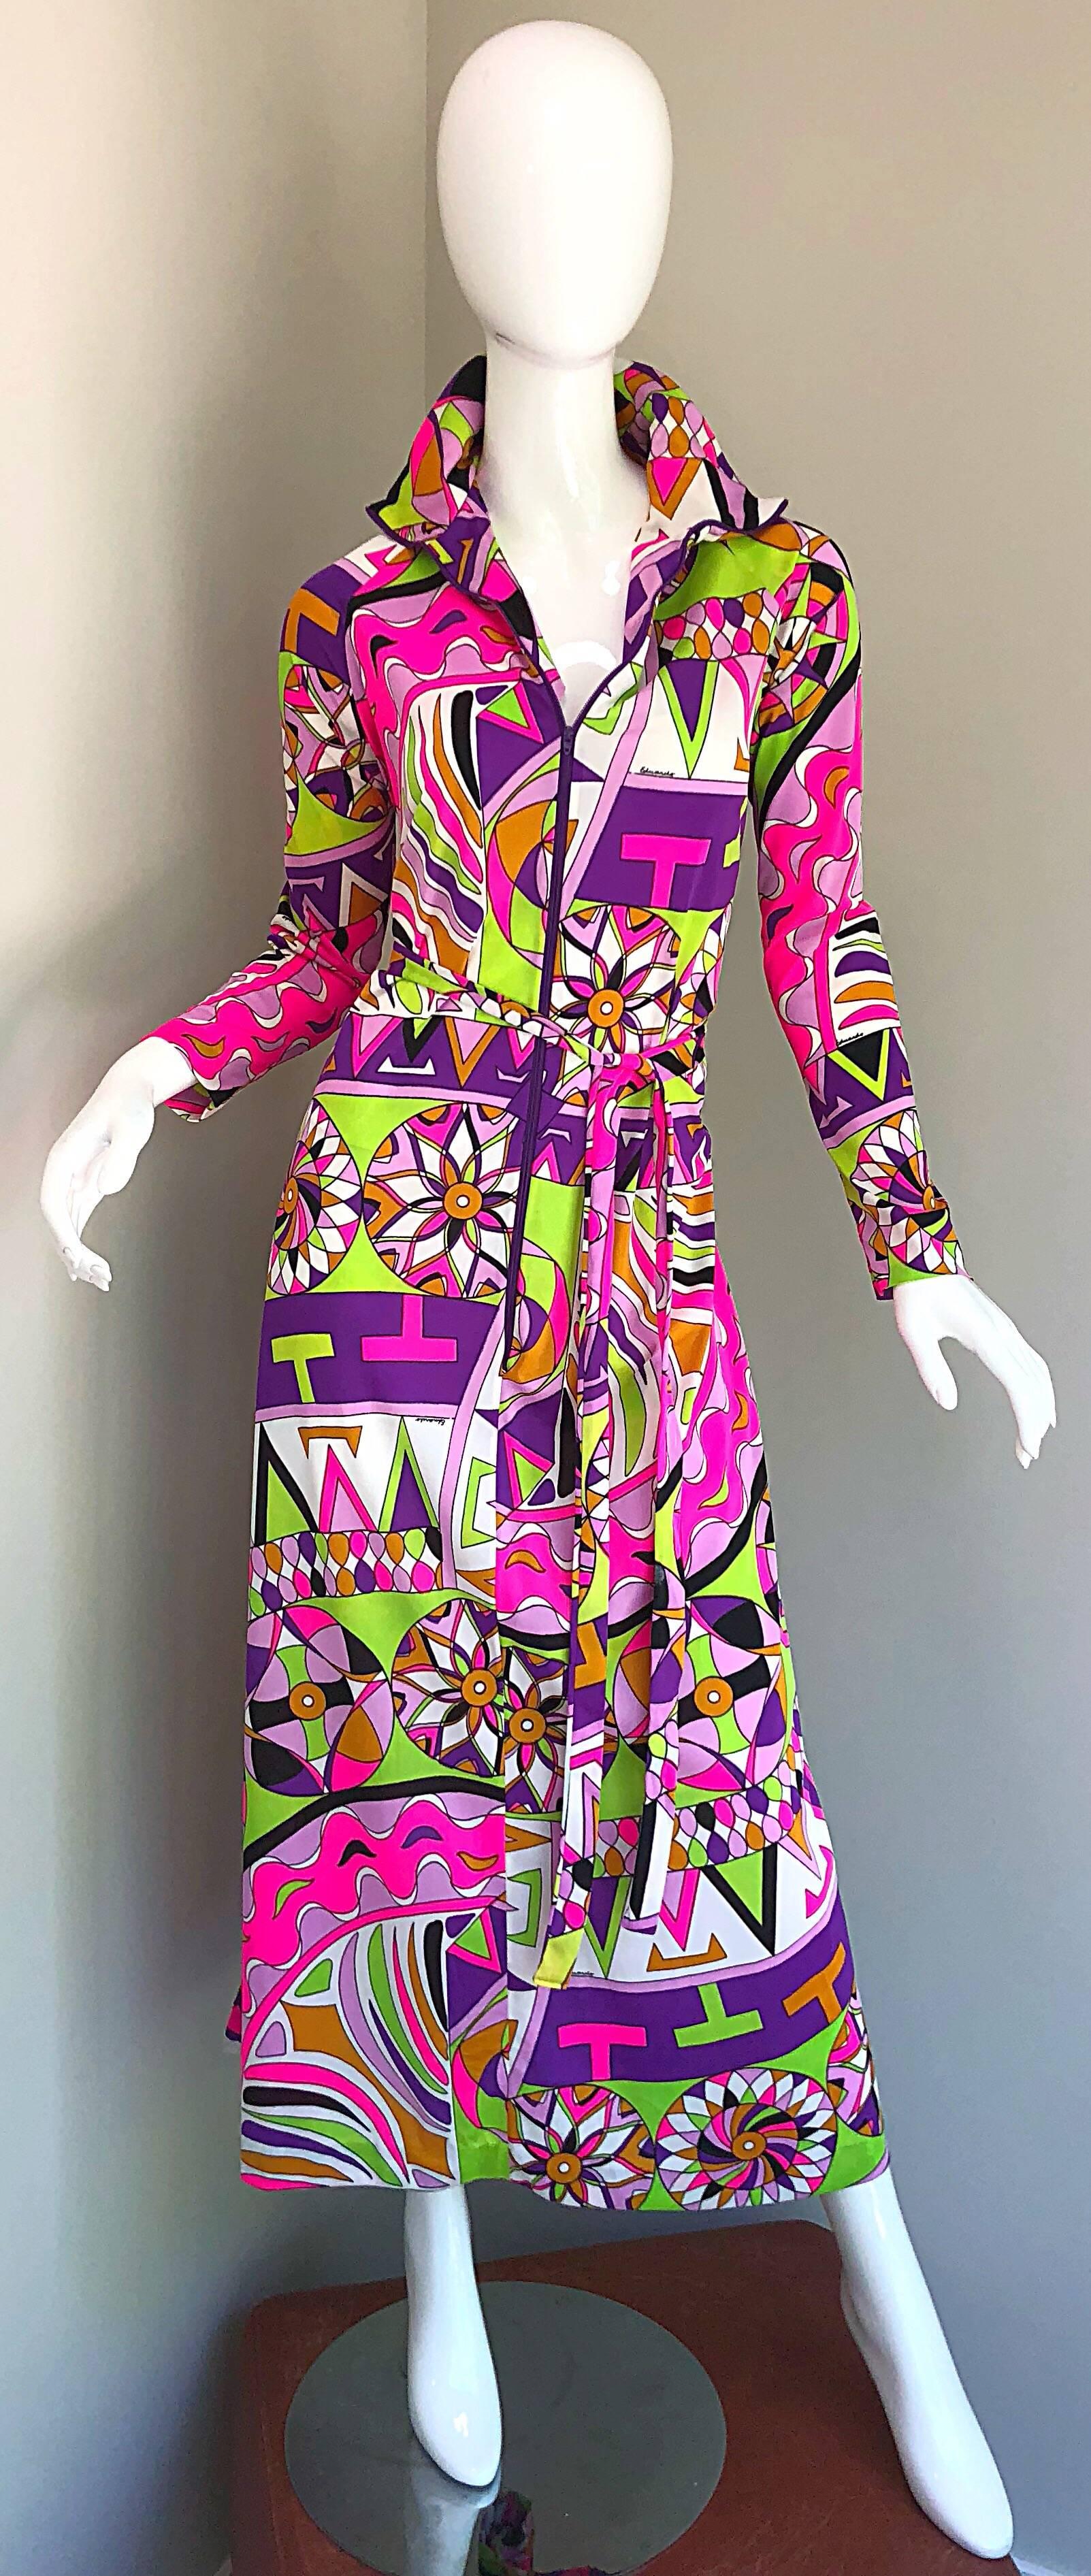 Amazing 1970s SAKS FIFTH AVE. Eduardo signed kaleidoscope print long sleeve nylon jersey maxi dress! Features a full zipper up the front, all the way to the top neck. This bold print is a dead ringer for an Emilio Pucci print. Vibrant colors of hot